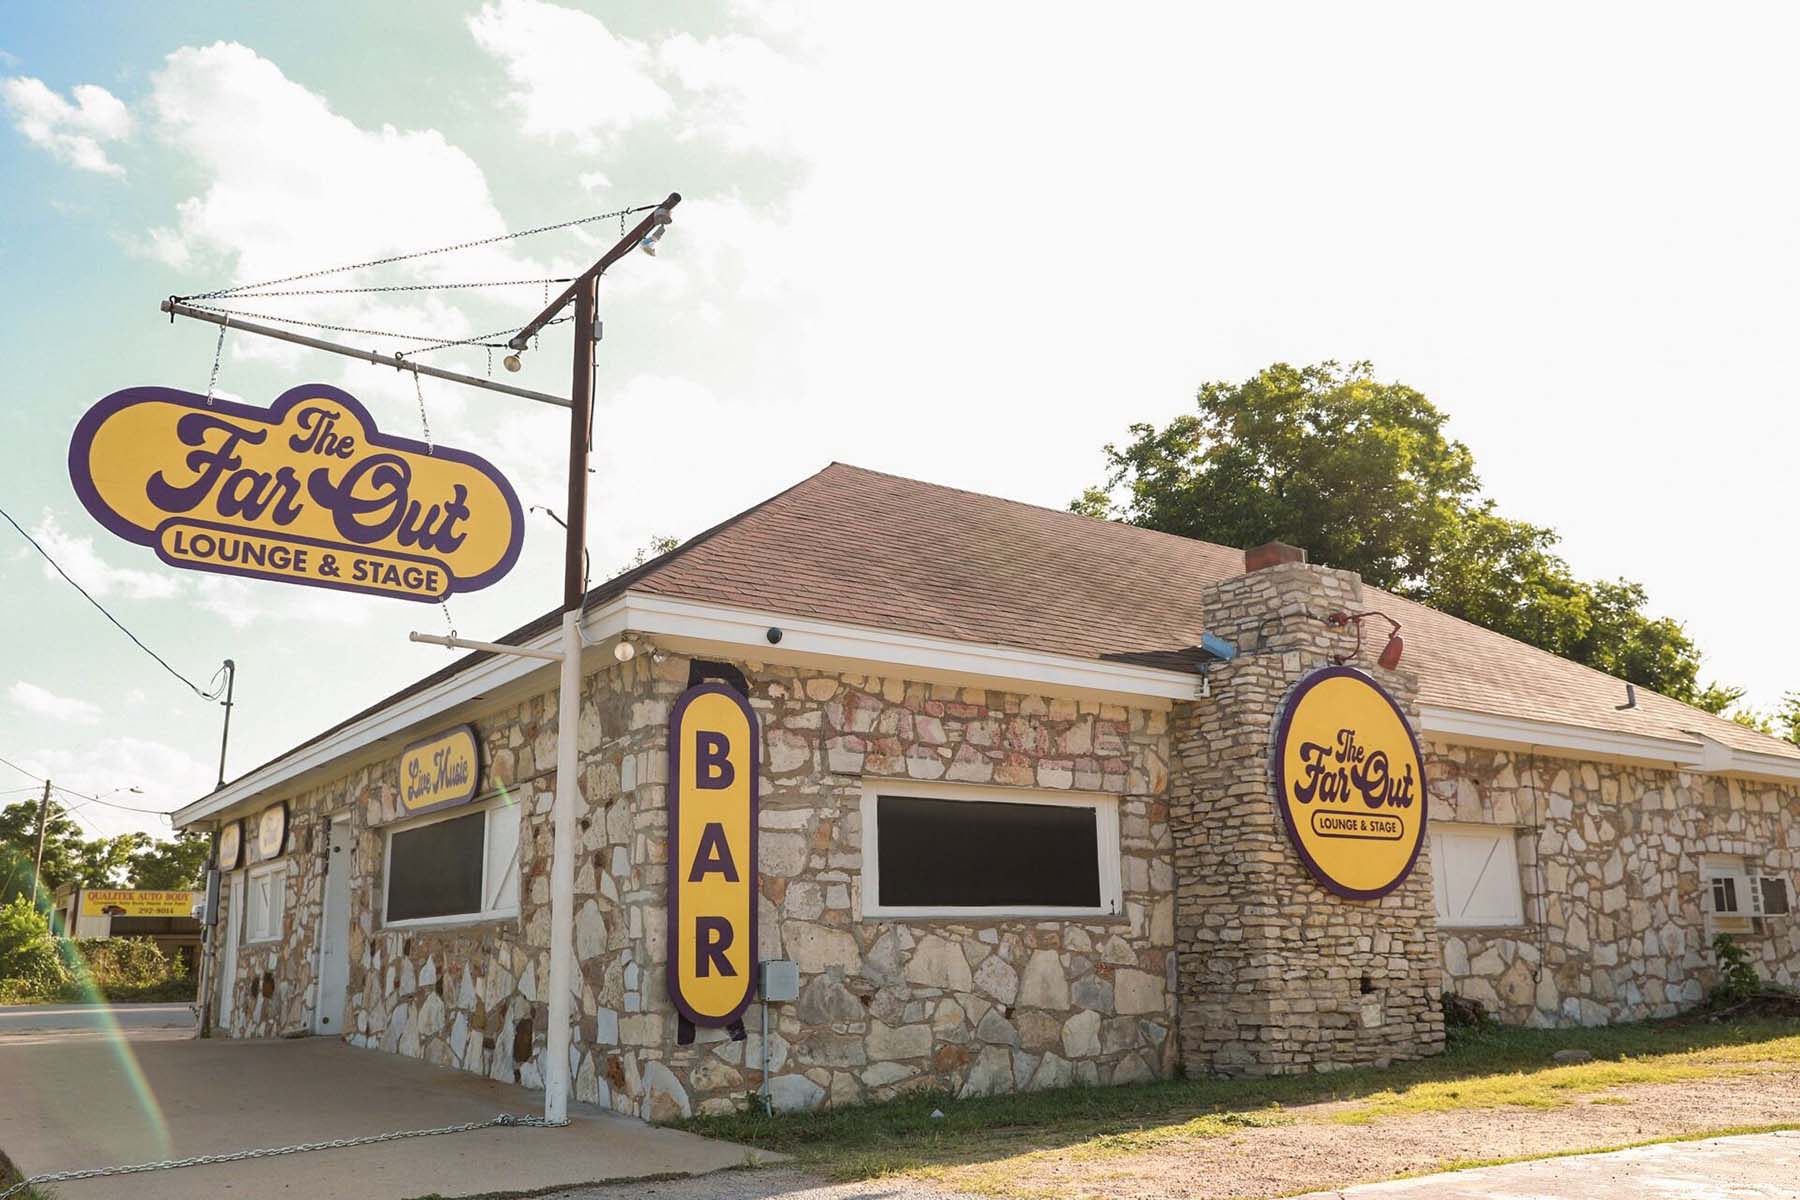 It's a neighborhood bar with great drinks and live music in far south Austin. Photo permission by Pedro Carvalho - Far Out Austin.